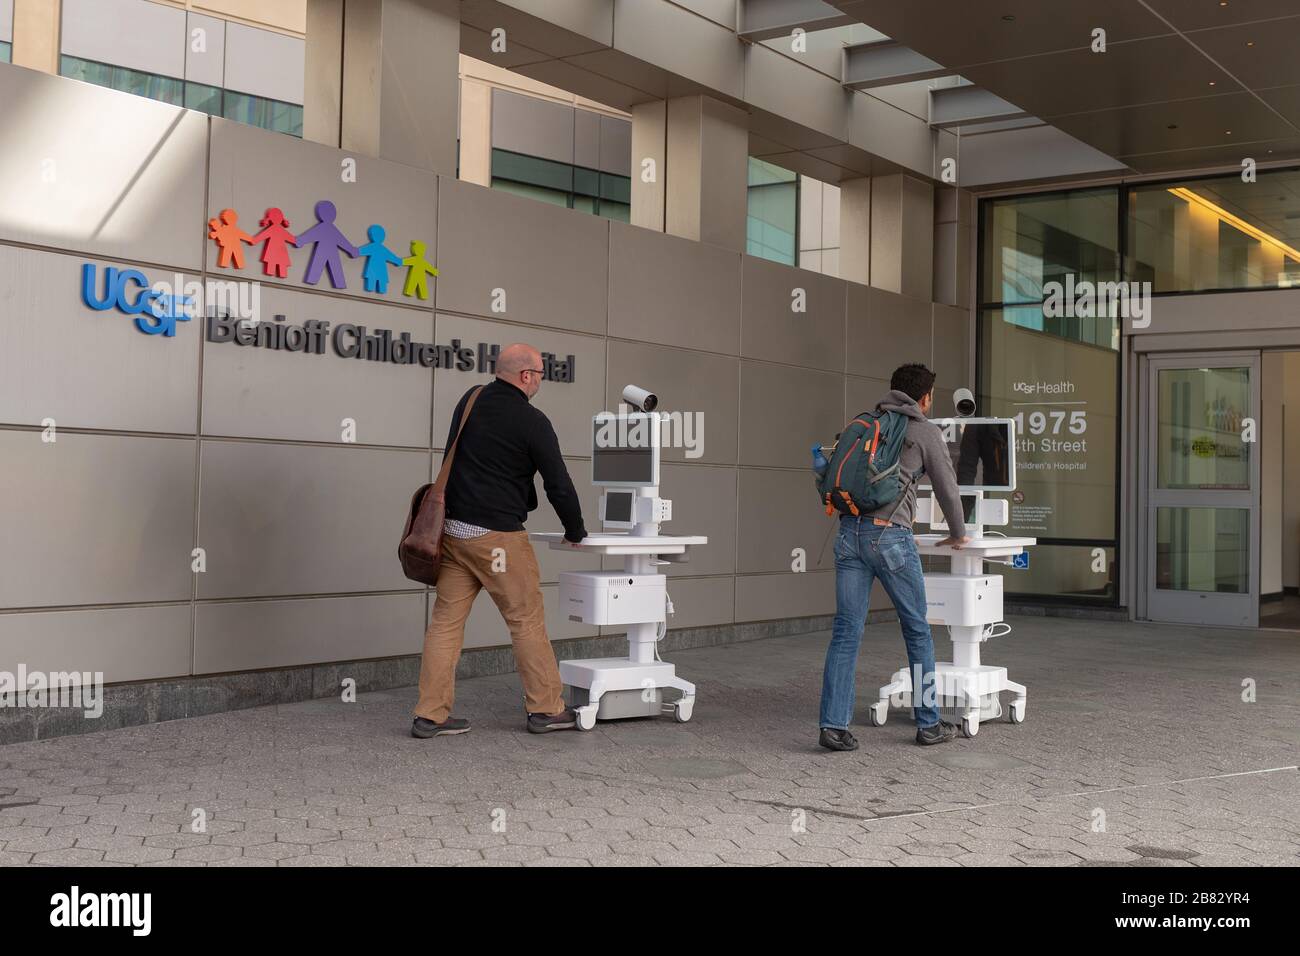 Two staff members wheel Amwell telemedicine carts into the entrance of the University of California San Francisco (UCSF) Benioff Children's Hospital in Mission Bay, San Francisco, California during an outbreak of the COVID-19 coronavirus, March 16, 2020. As a result of the outbreak, patients are increasingly being asked to conduct telemedicine appointments to avoid infecting healthcare workers. () Stock Photo